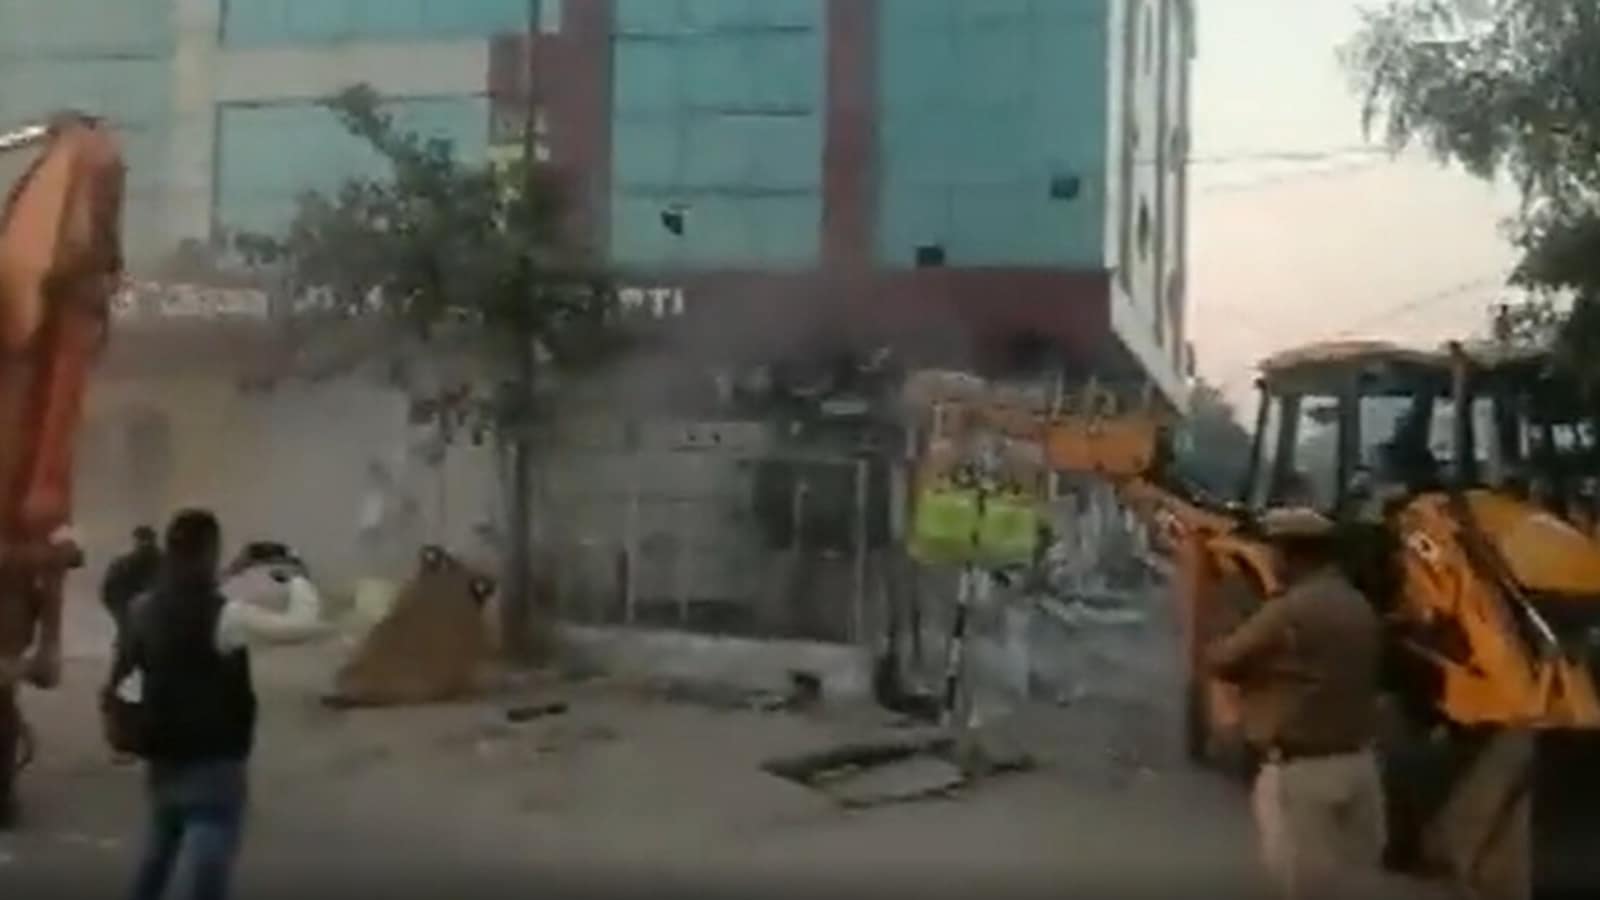 Rpsc Case Officials Demolish Building Used To Run Coaching Centre Illegally Hindustan Times